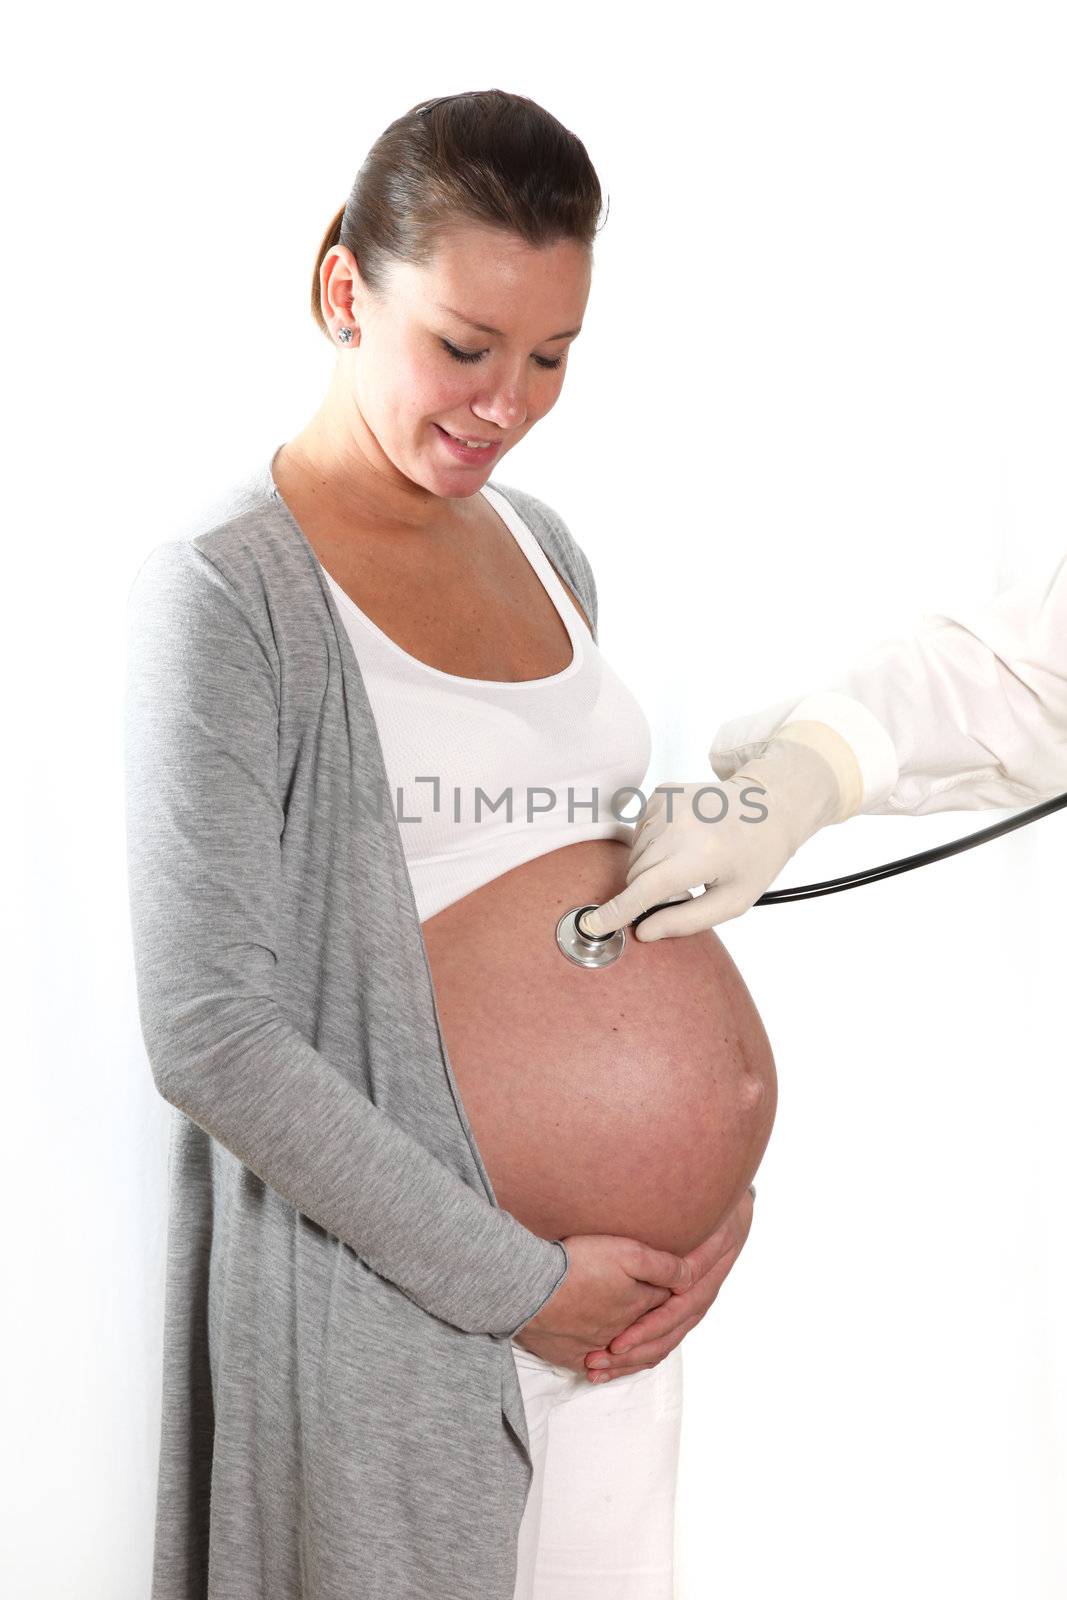 doctor with stethoscope examining the abdomen of a pregnant woman
 